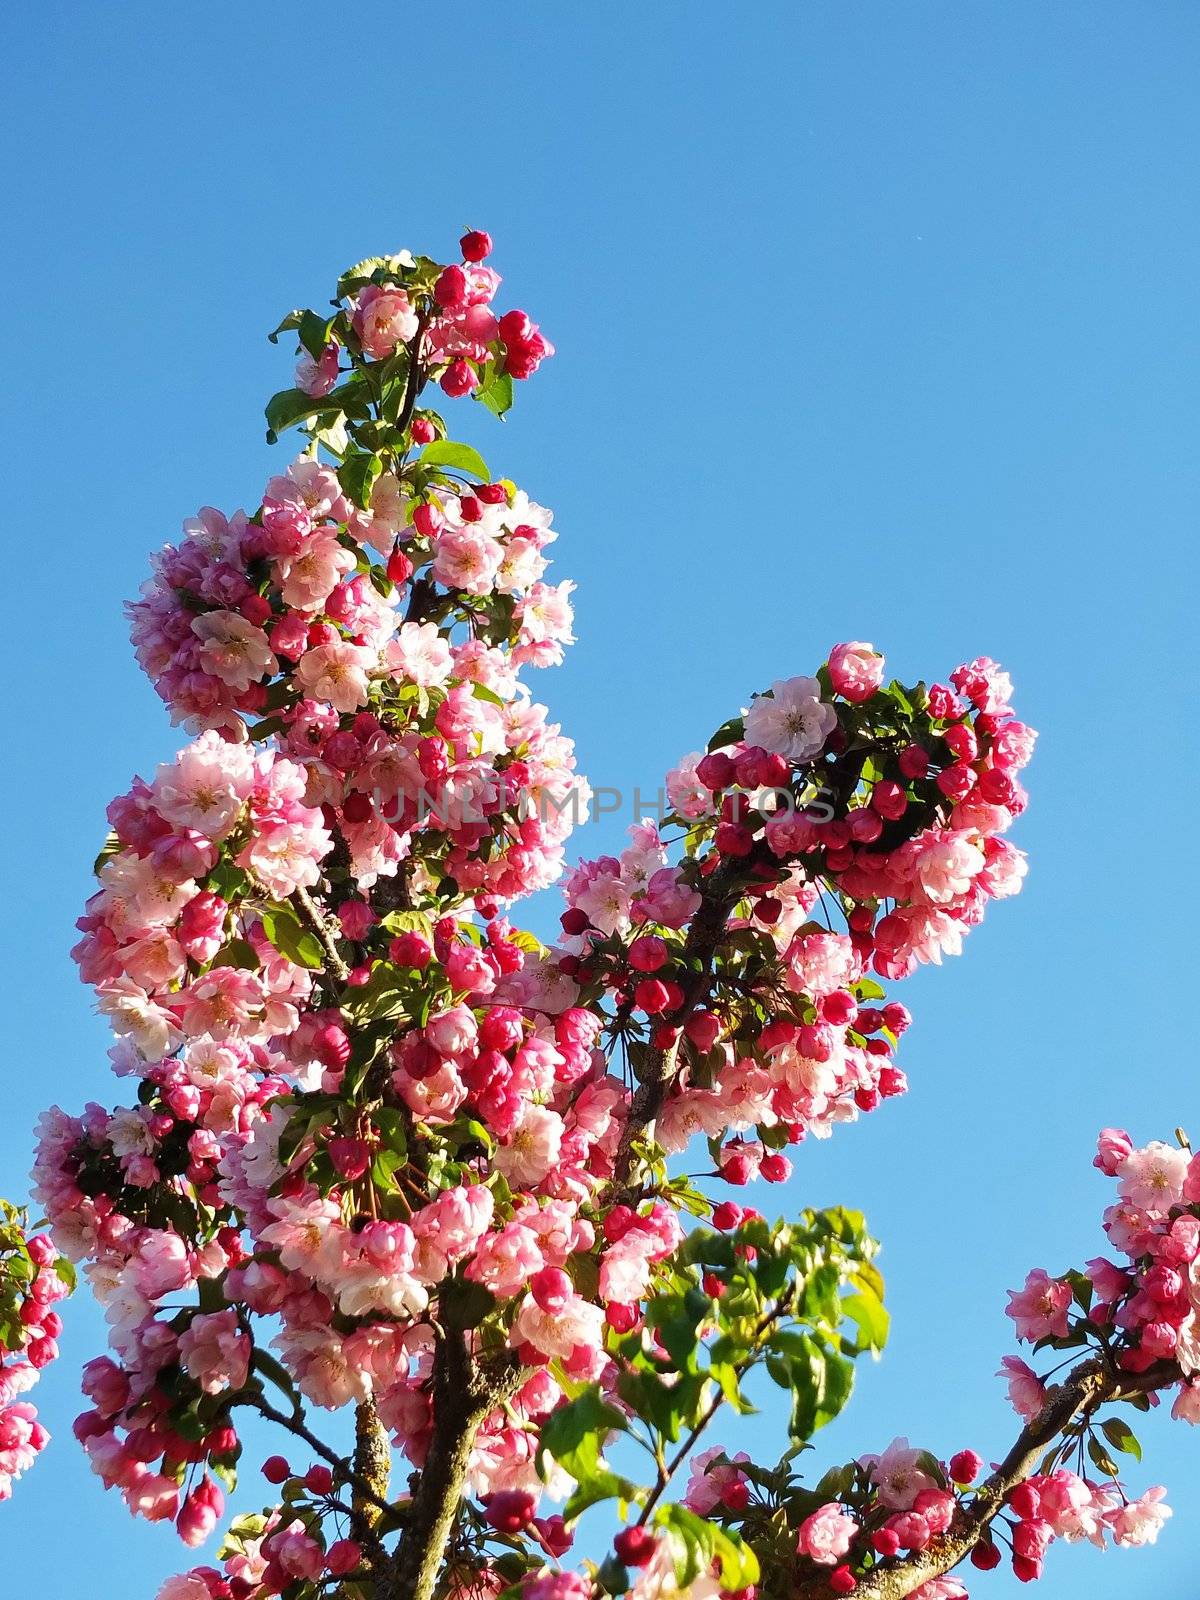 apple flowers and buds blooming at spring